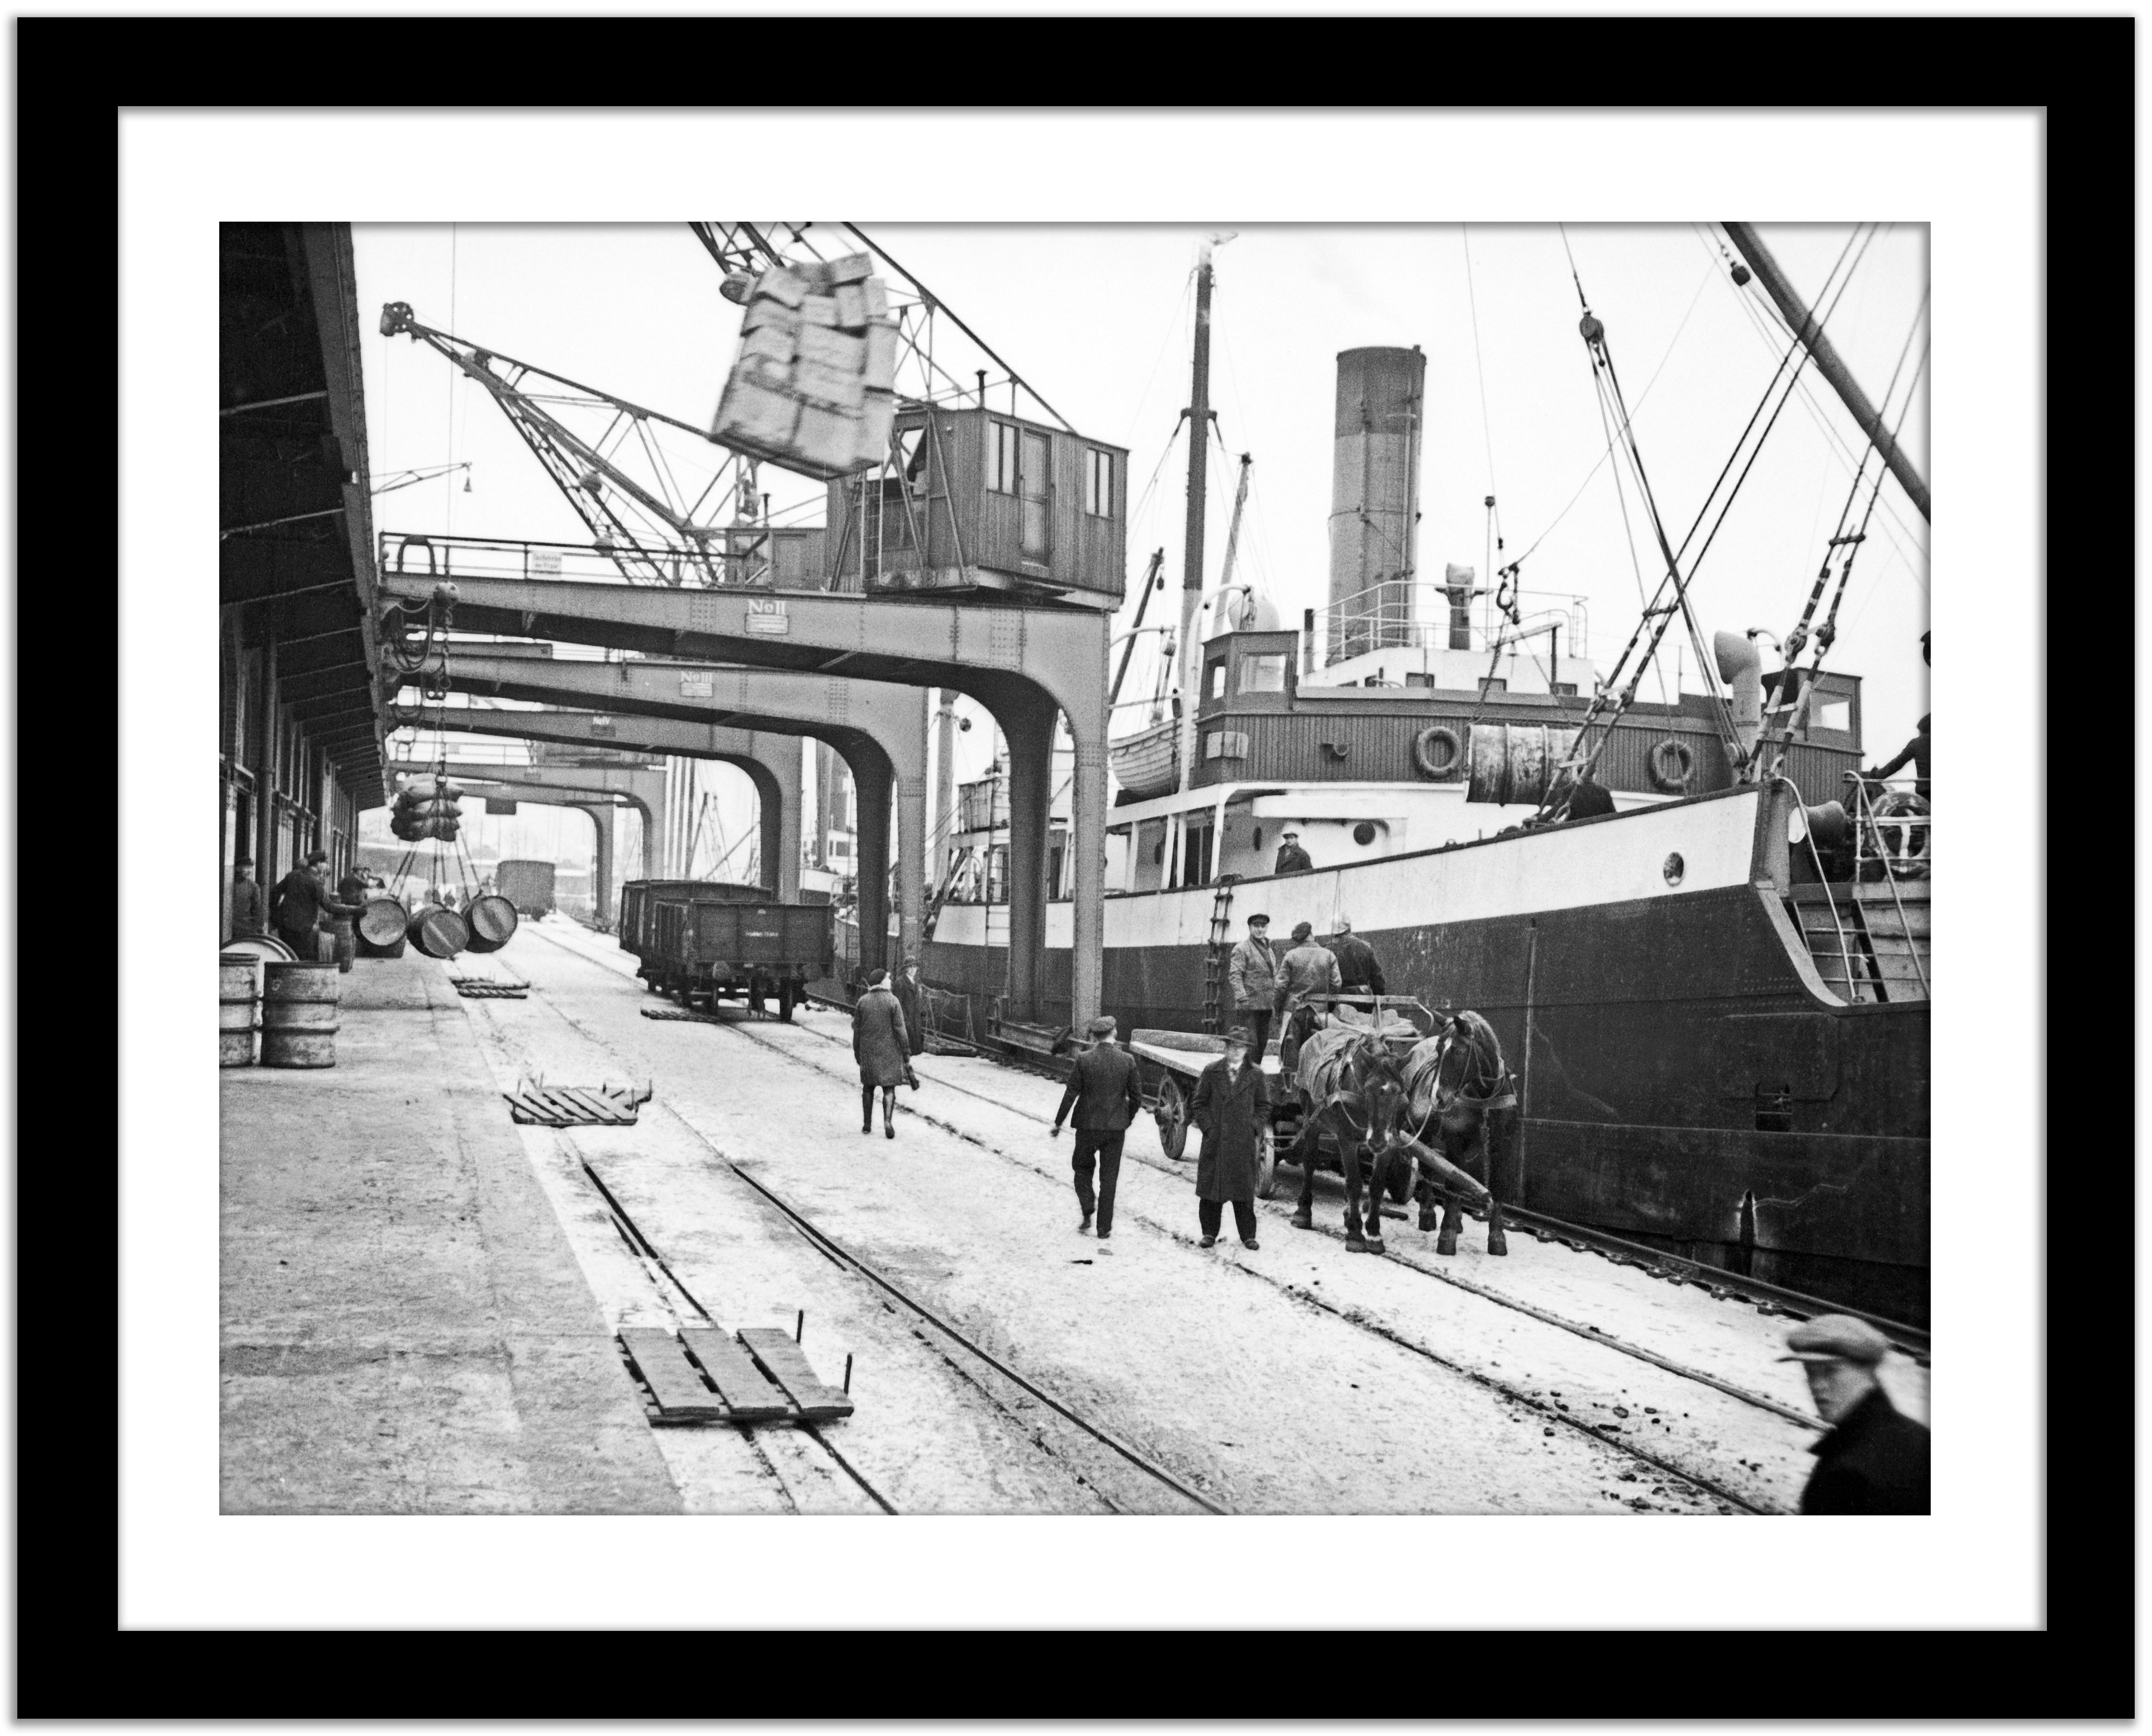 Cargo quay near the bridge at the harbor, Germany 1934 Printed Later  - Gray Black and White Photograph by Karl Heinrich Lämmel